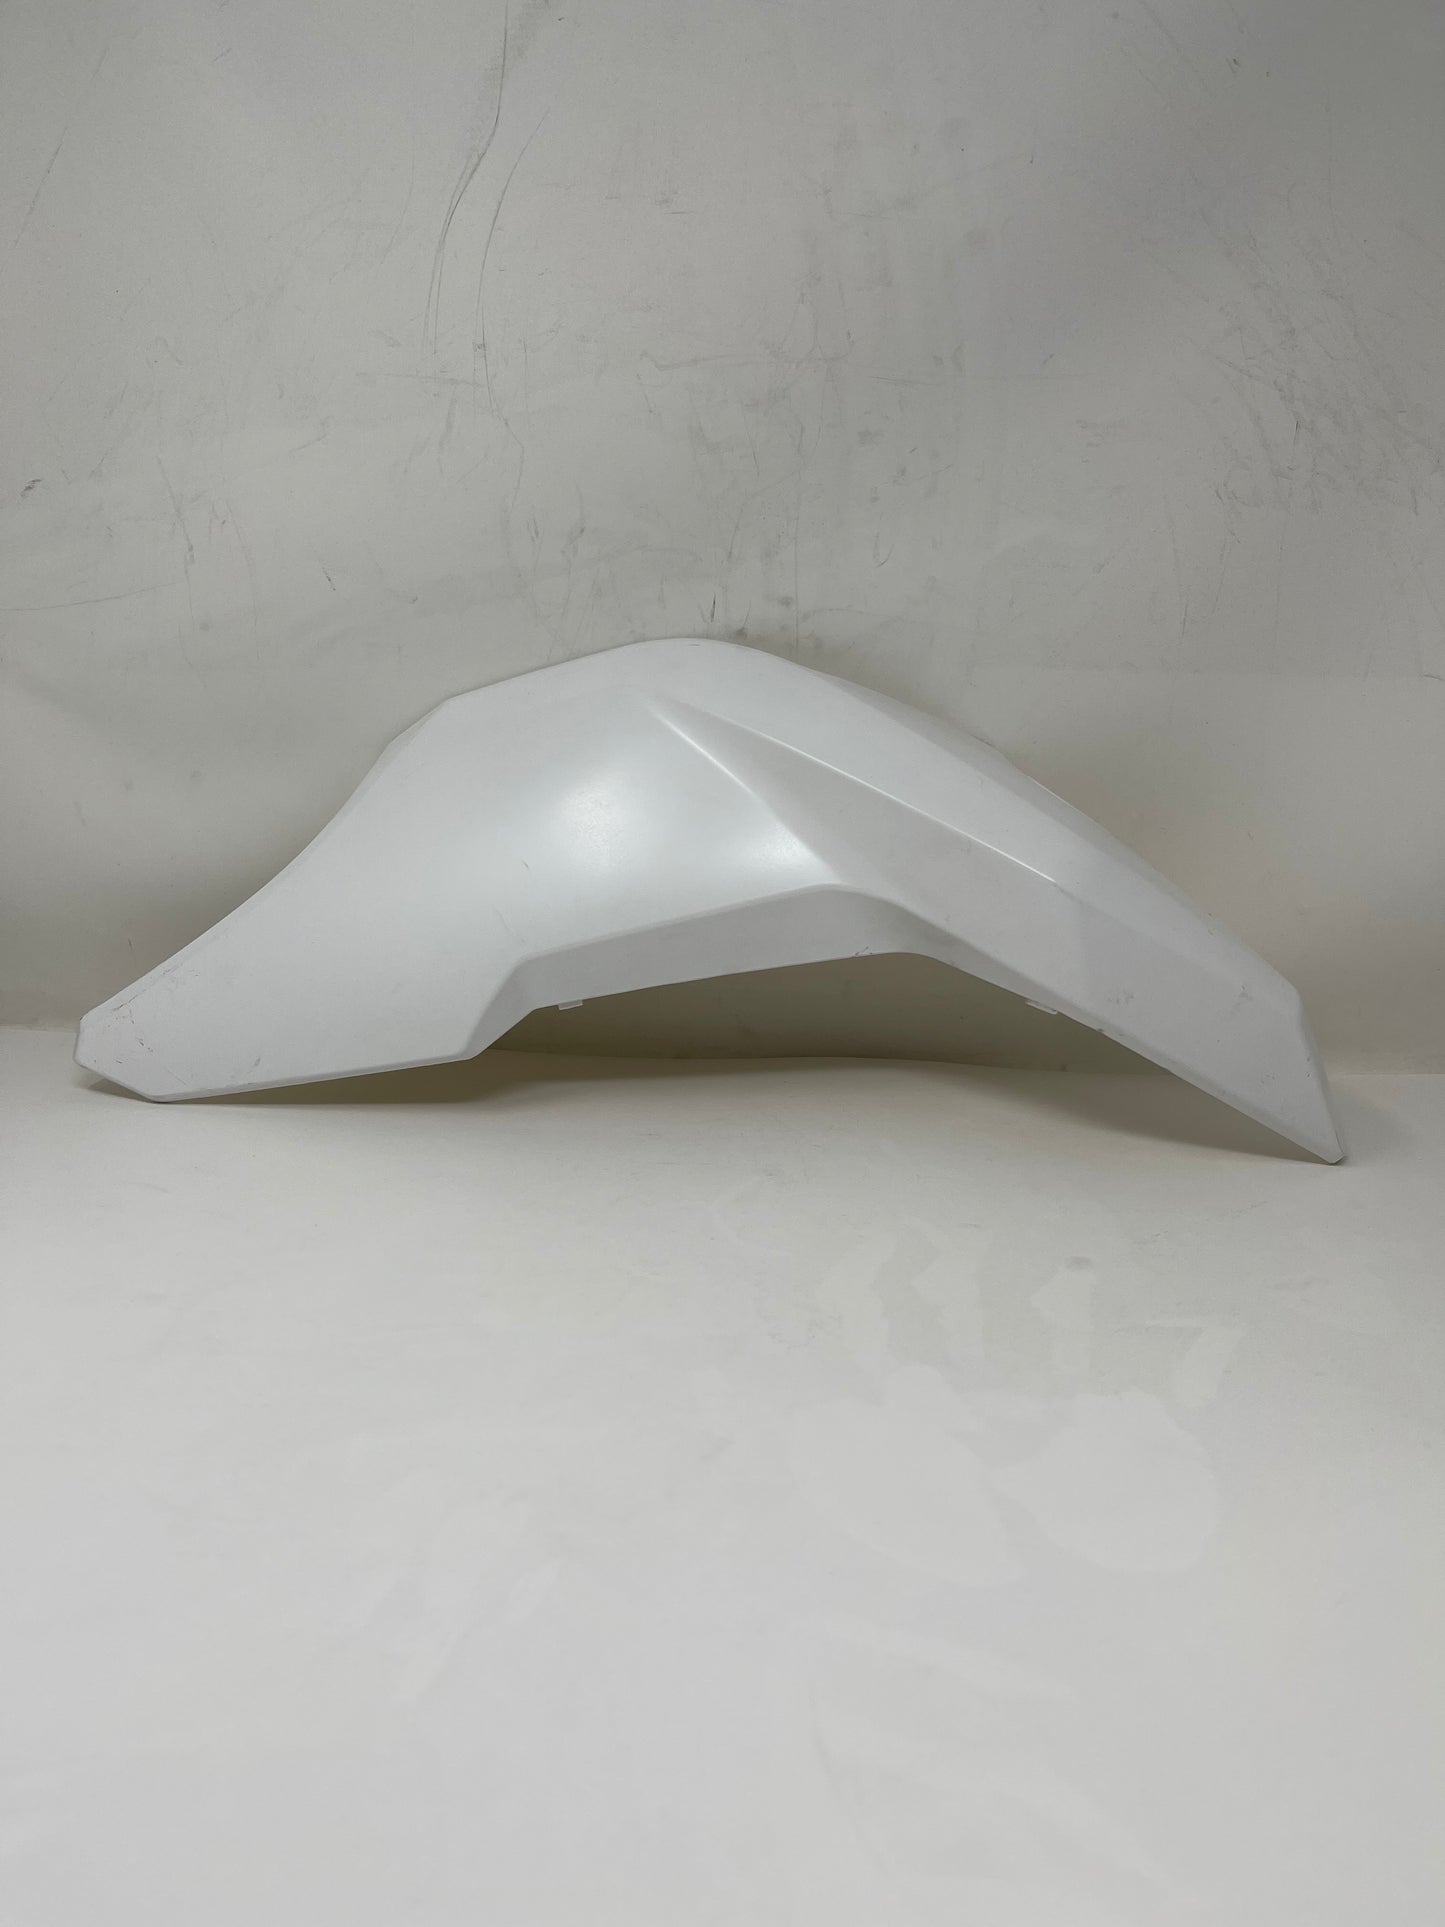 Right fuel tank cover for BD125-10 in Matte White Part # 125010003